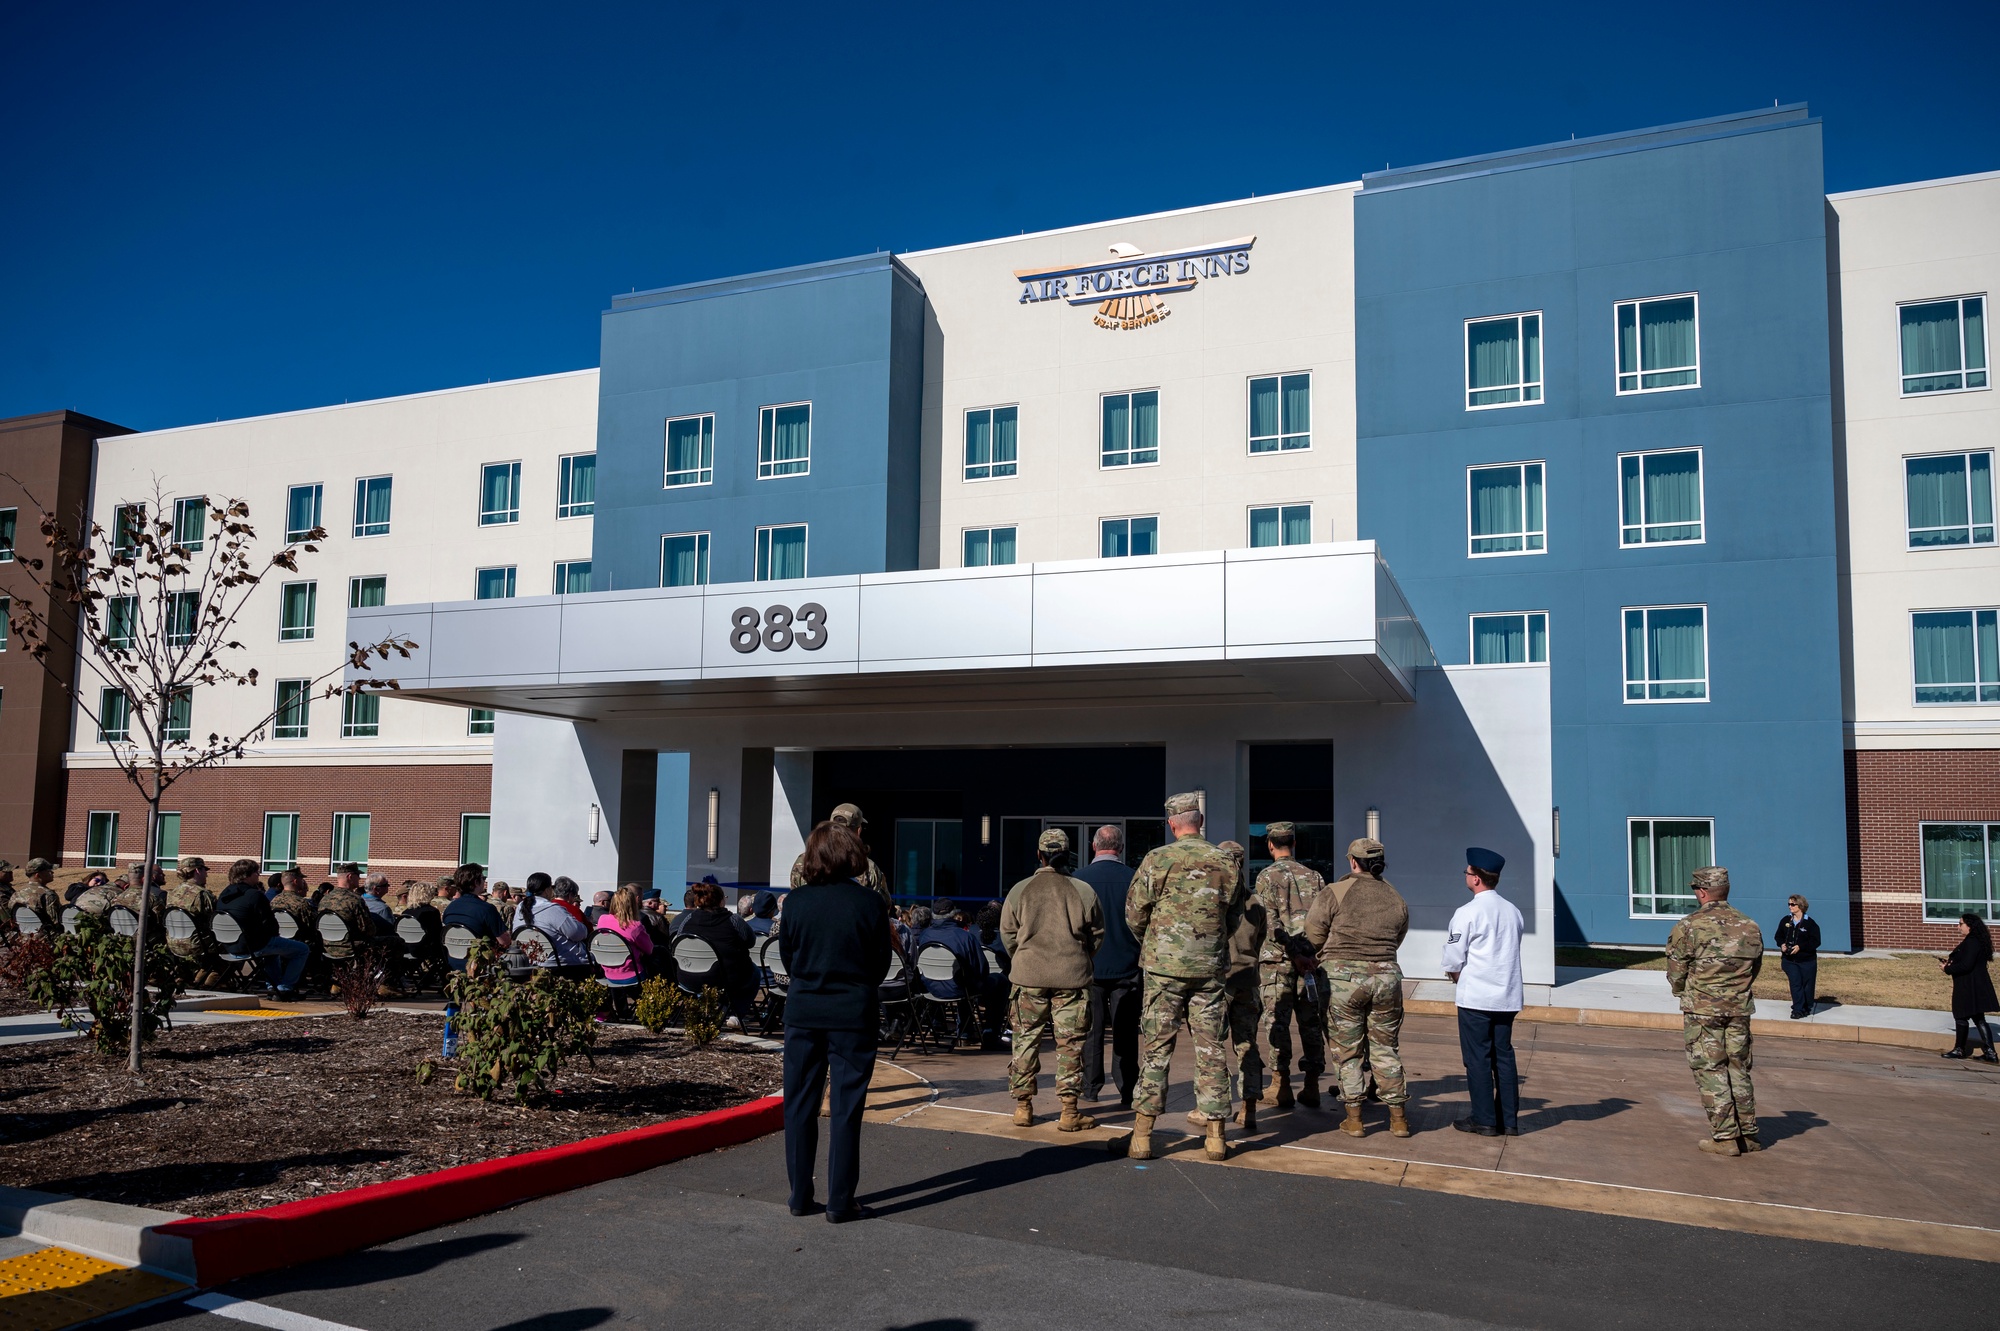 DVIDS - Images - TLR opens new lodging facility [Image 1 of 5]